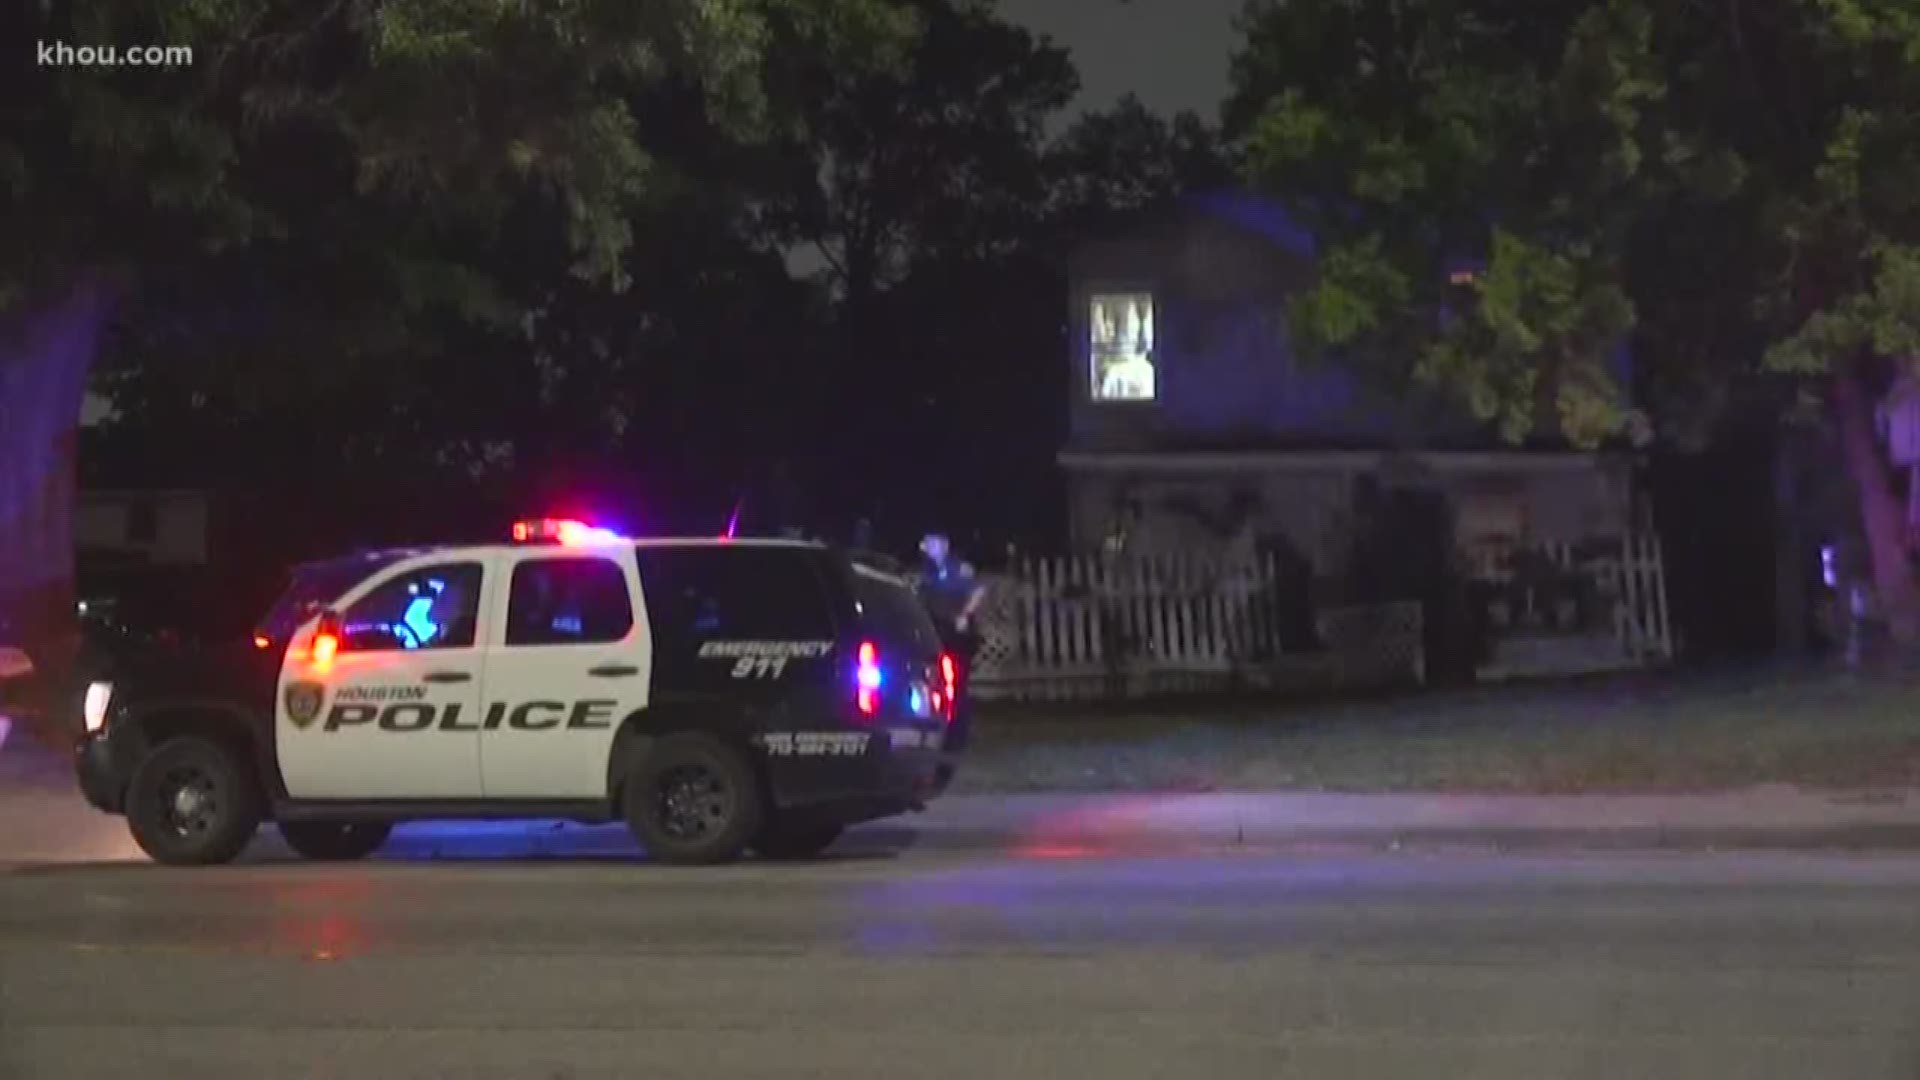 A woman has died after her neighbor stabbed her at her apartment complex in southeast Houston, according to Houston police.